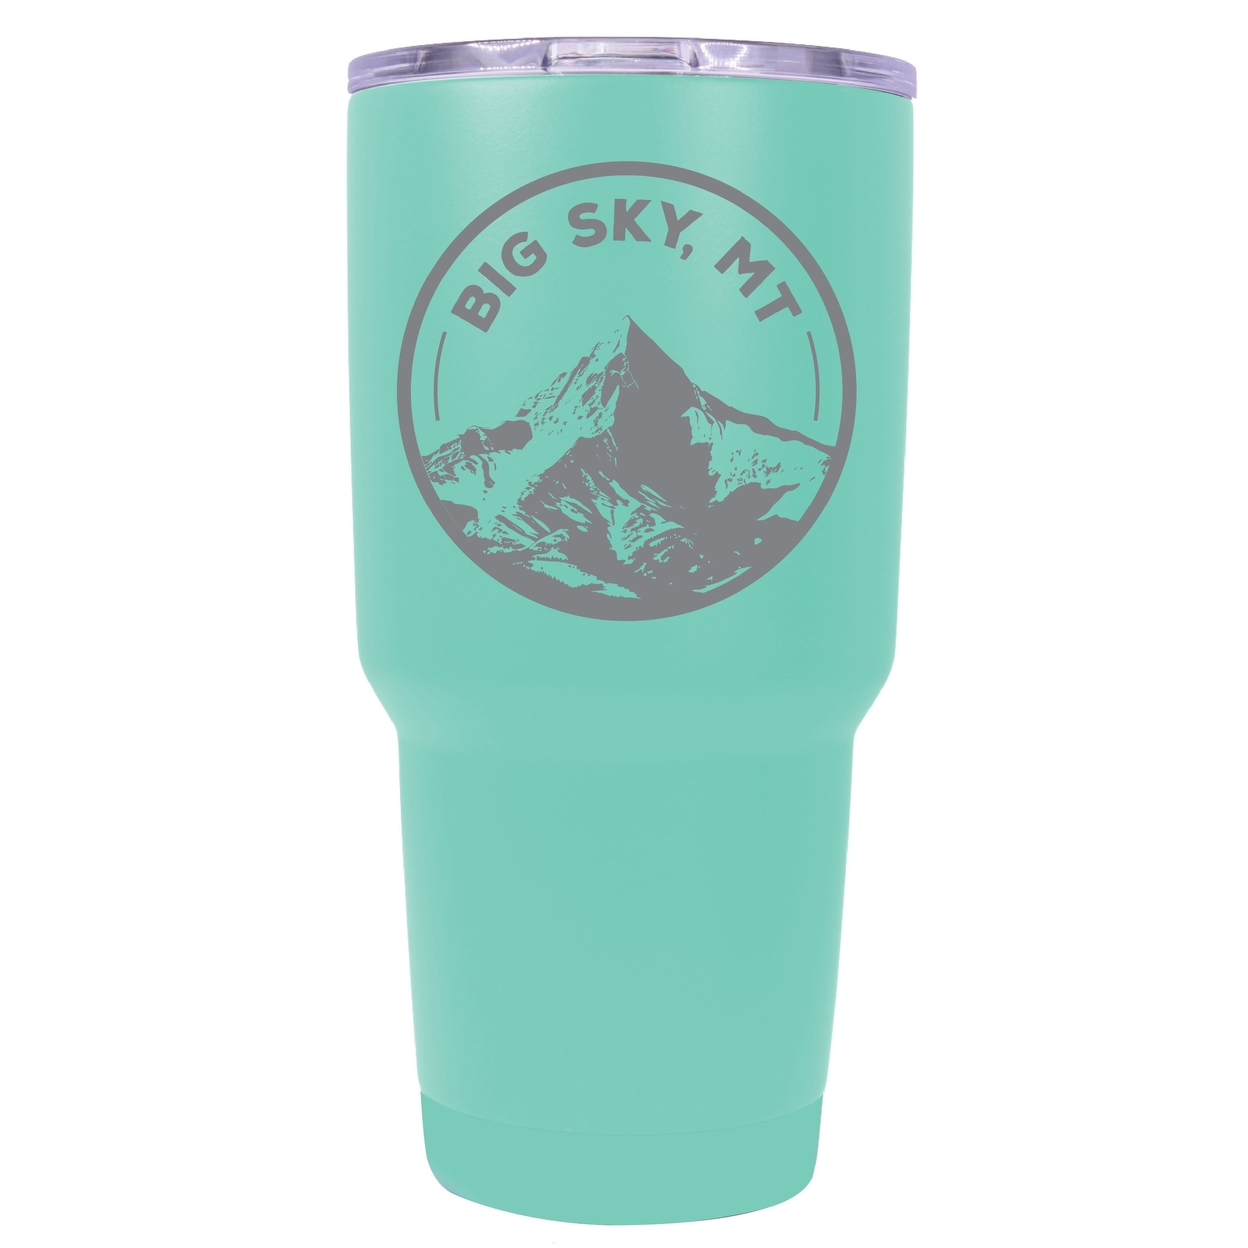 Big Sky Montana Souvenir 24 Oz Engraved Insulated Stainless Steel Tumbler - Red,,Single Unit